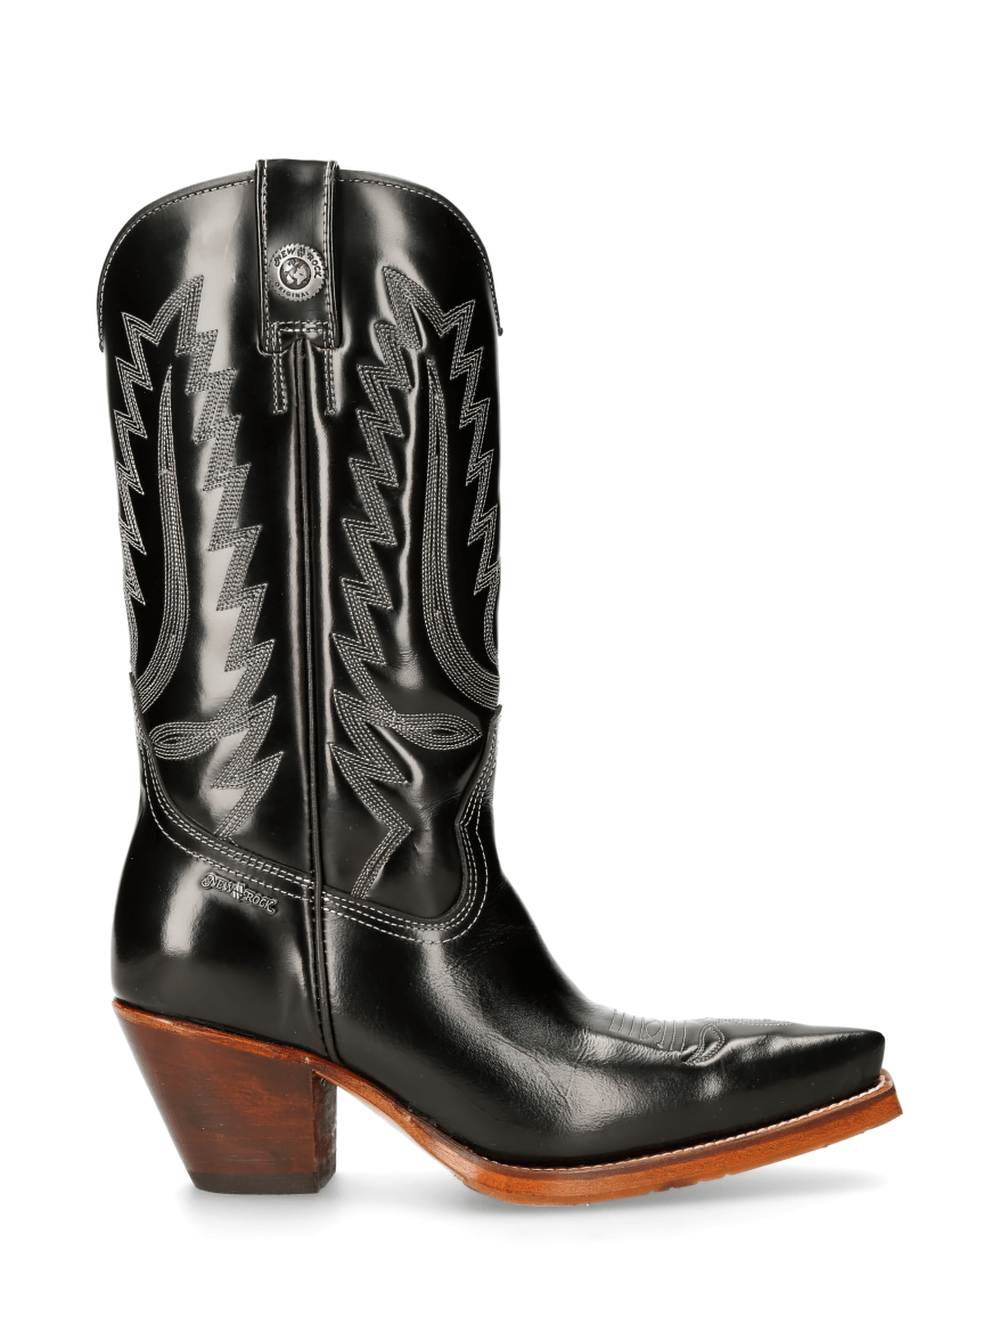 NEW ROCK Black Western Zipper High Boots for Ladies